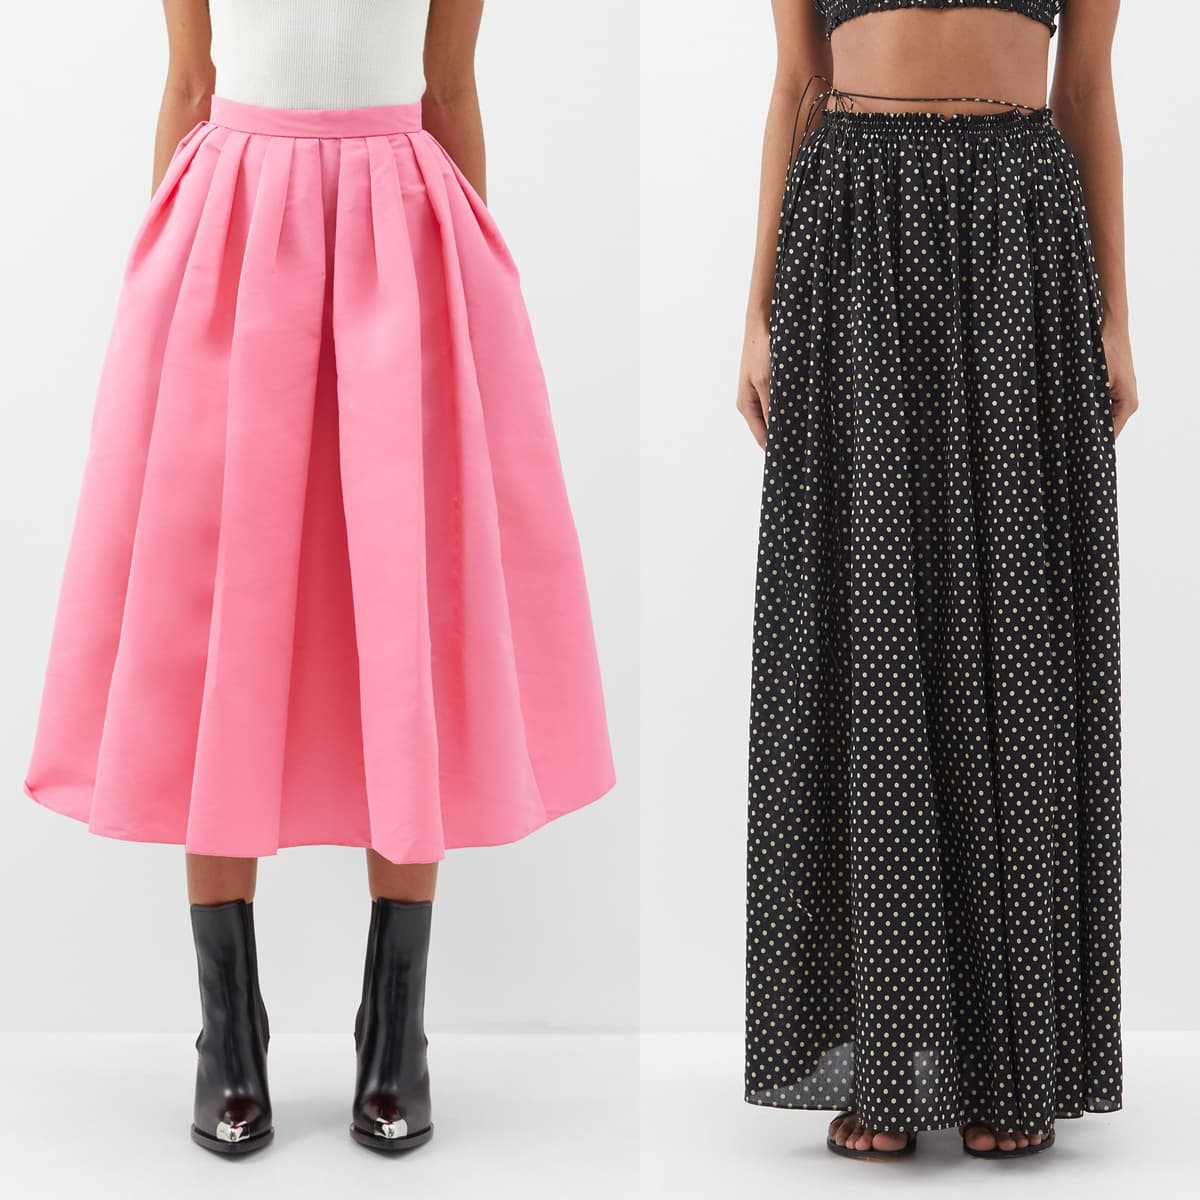 Midi skirts sit in between the knees and ankles while maxi skirts fall to the ankles